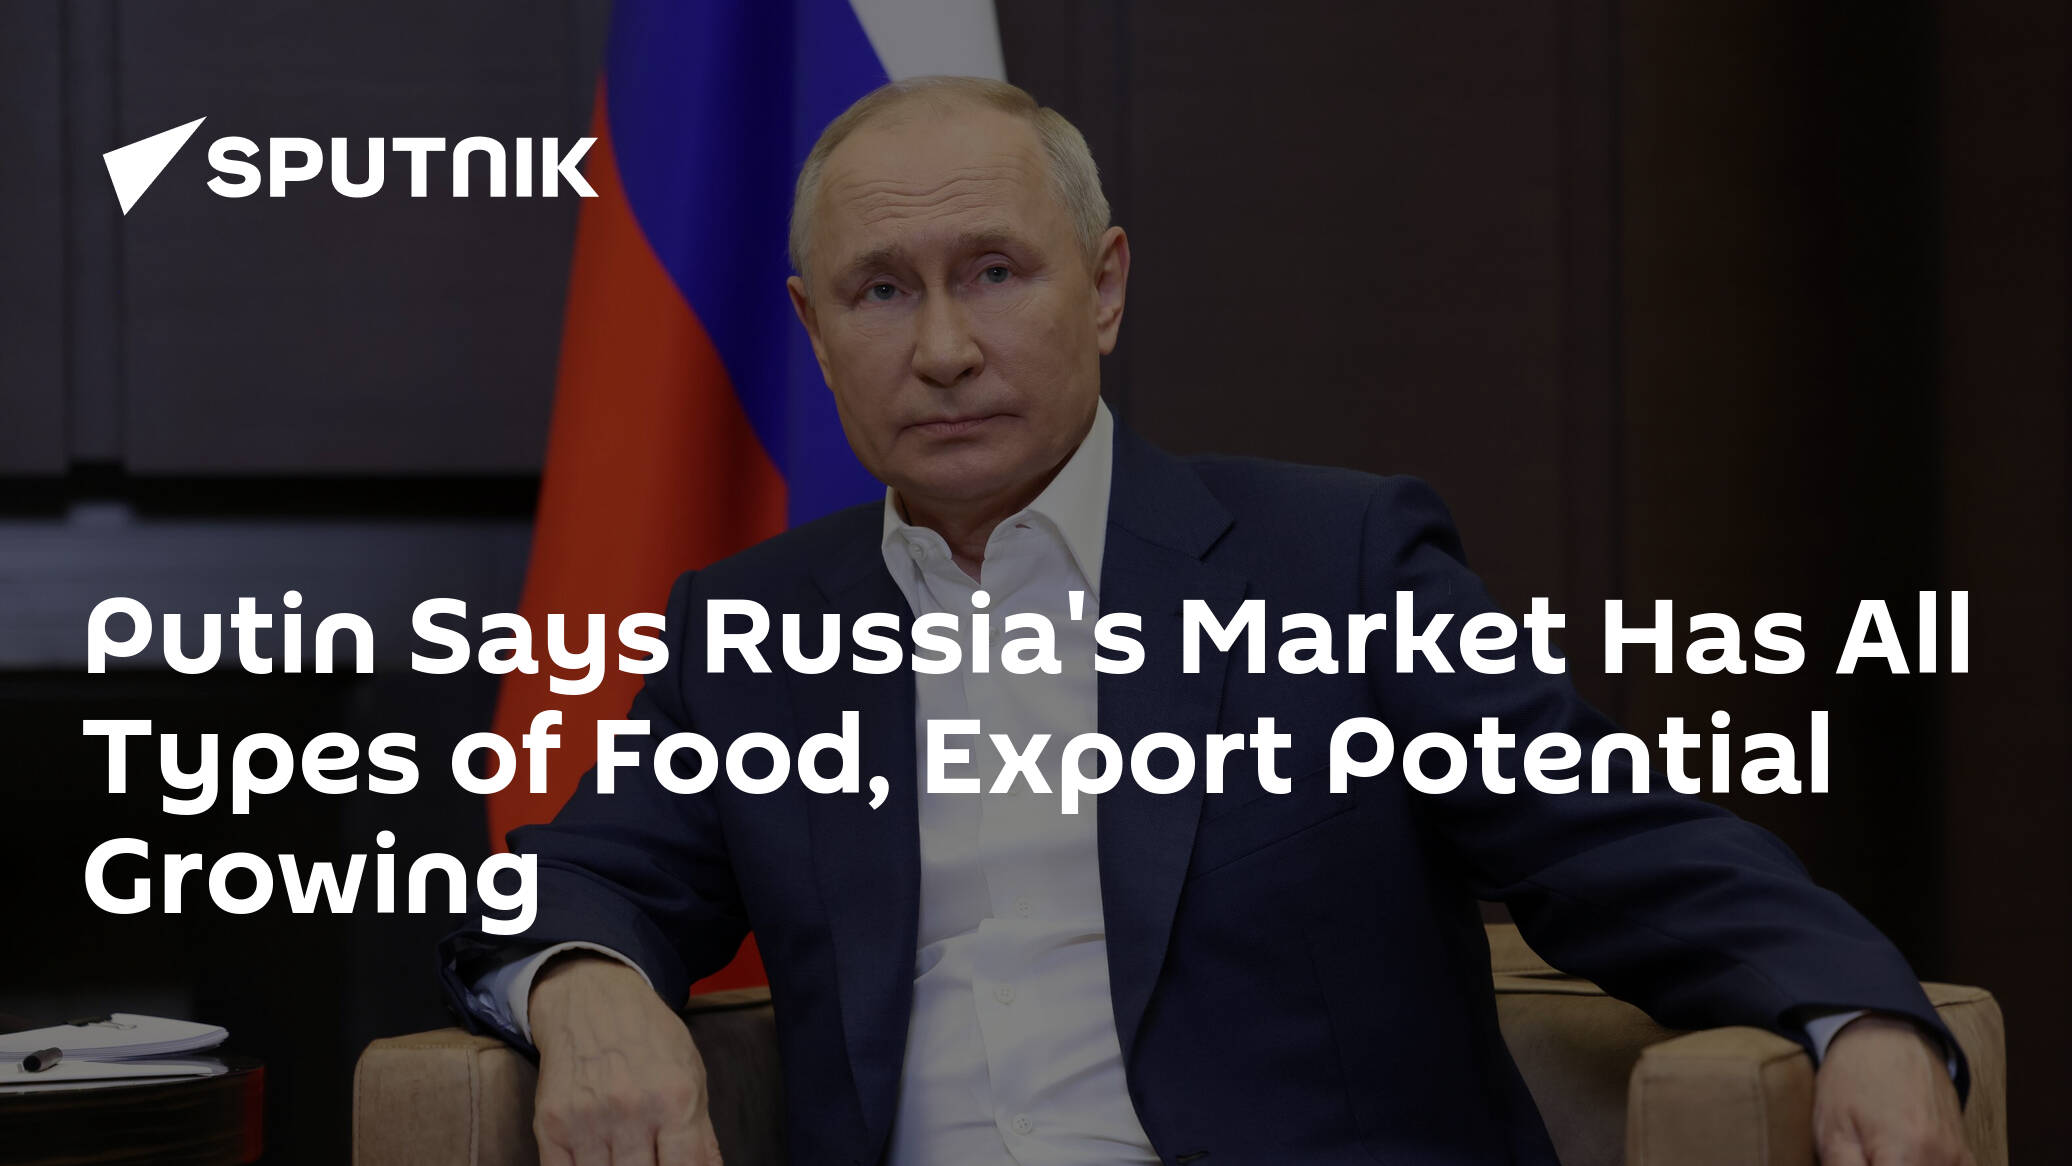 Putin Says Russia's Market Has All Types of Food, Export Potential Growing